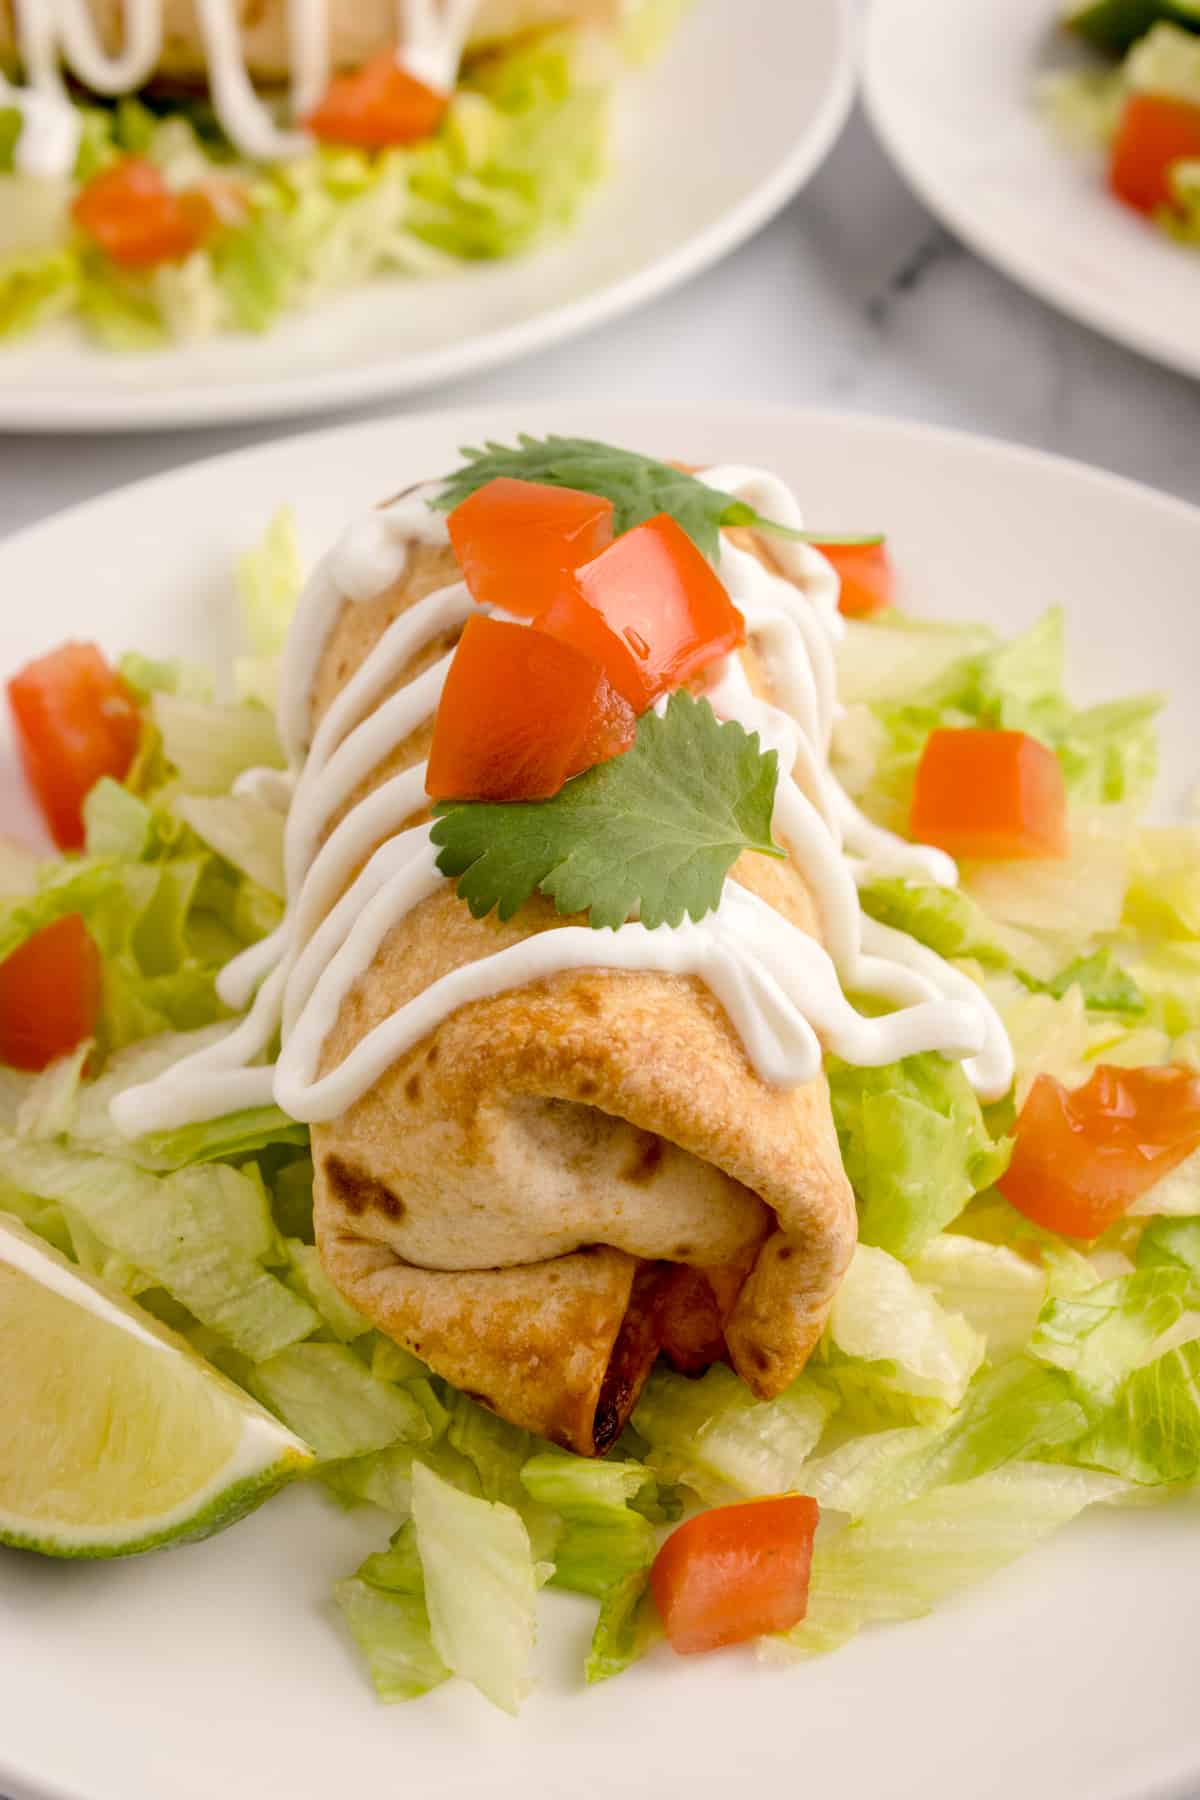 An image of a chimichanga on a plate, garnished with sour cream, cilantro, and diced tomatoes.